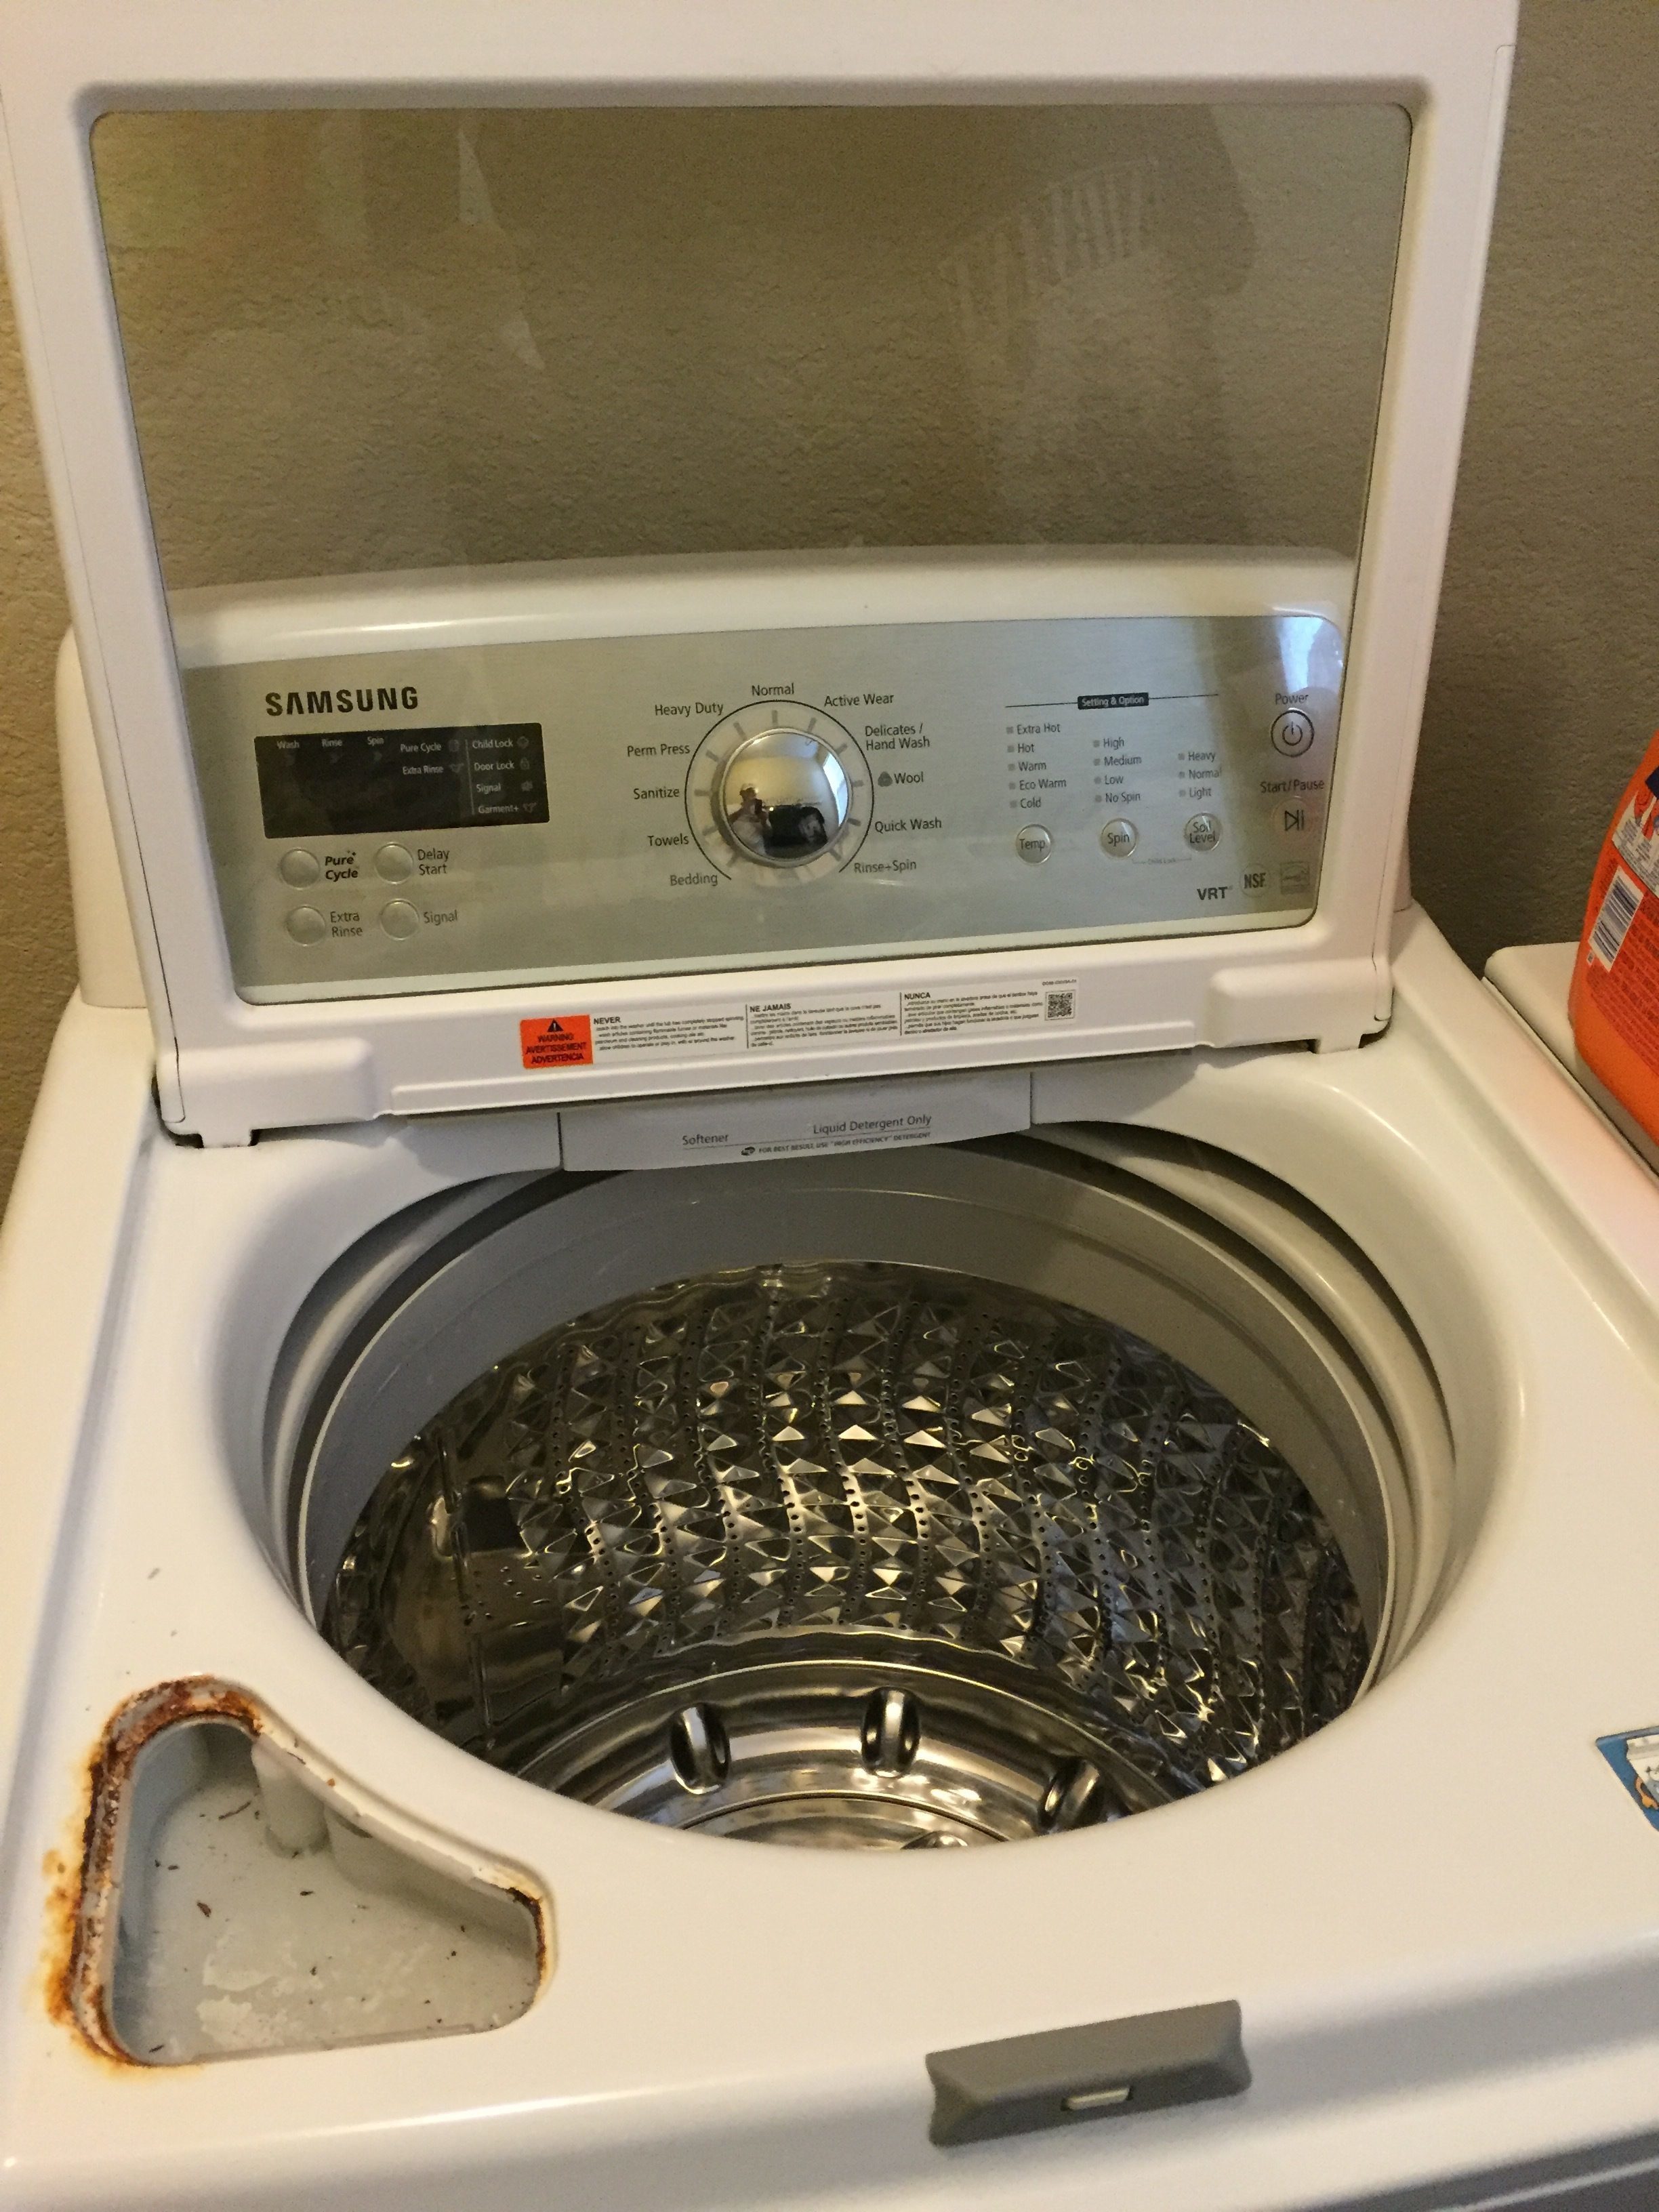 What are common terms and conditions of washing machine warranties?